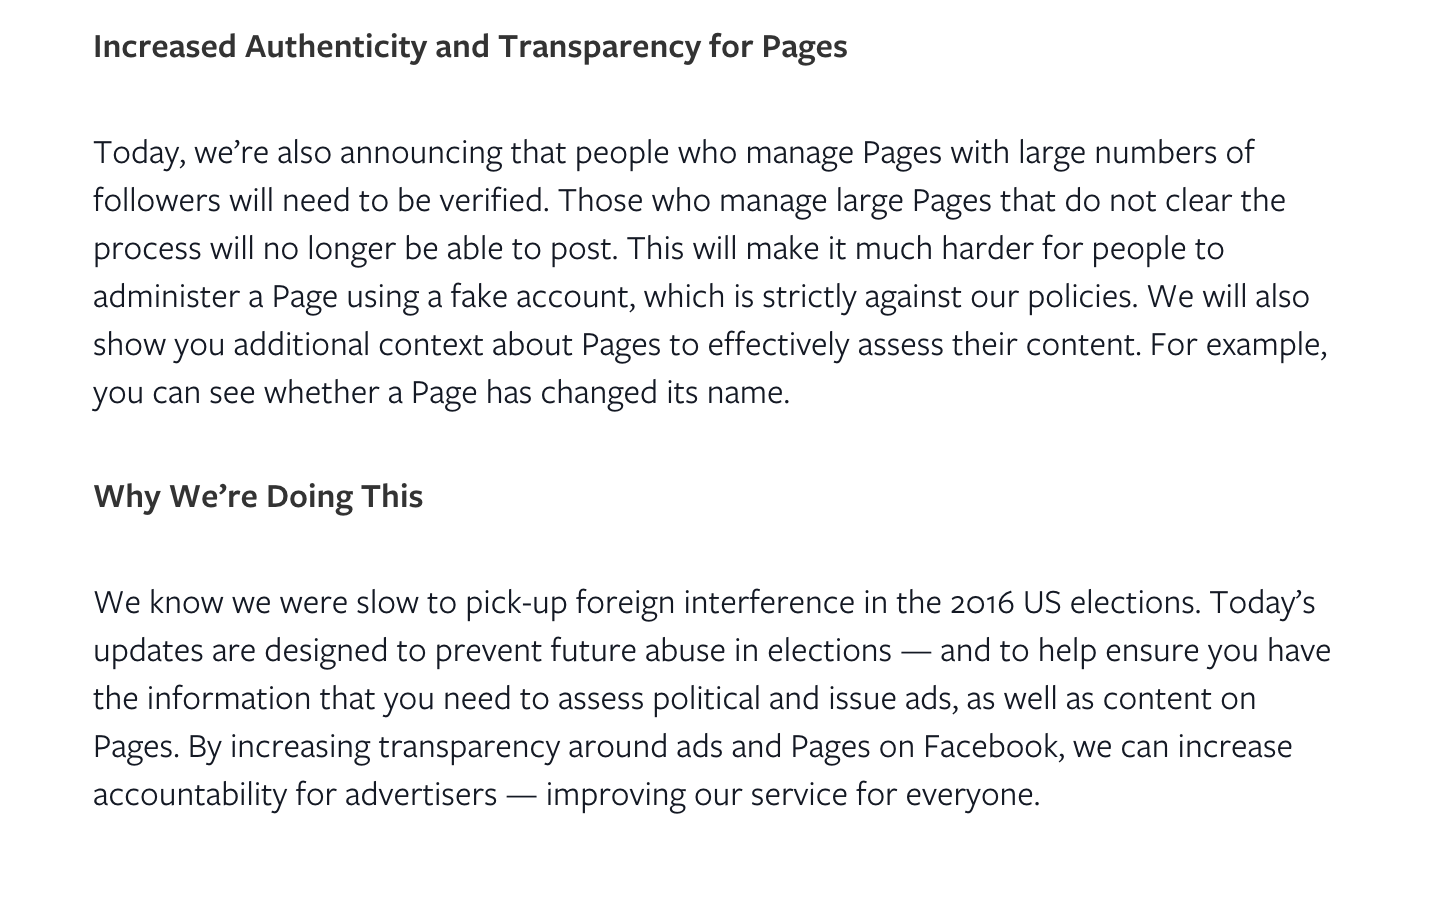 pages_transparency